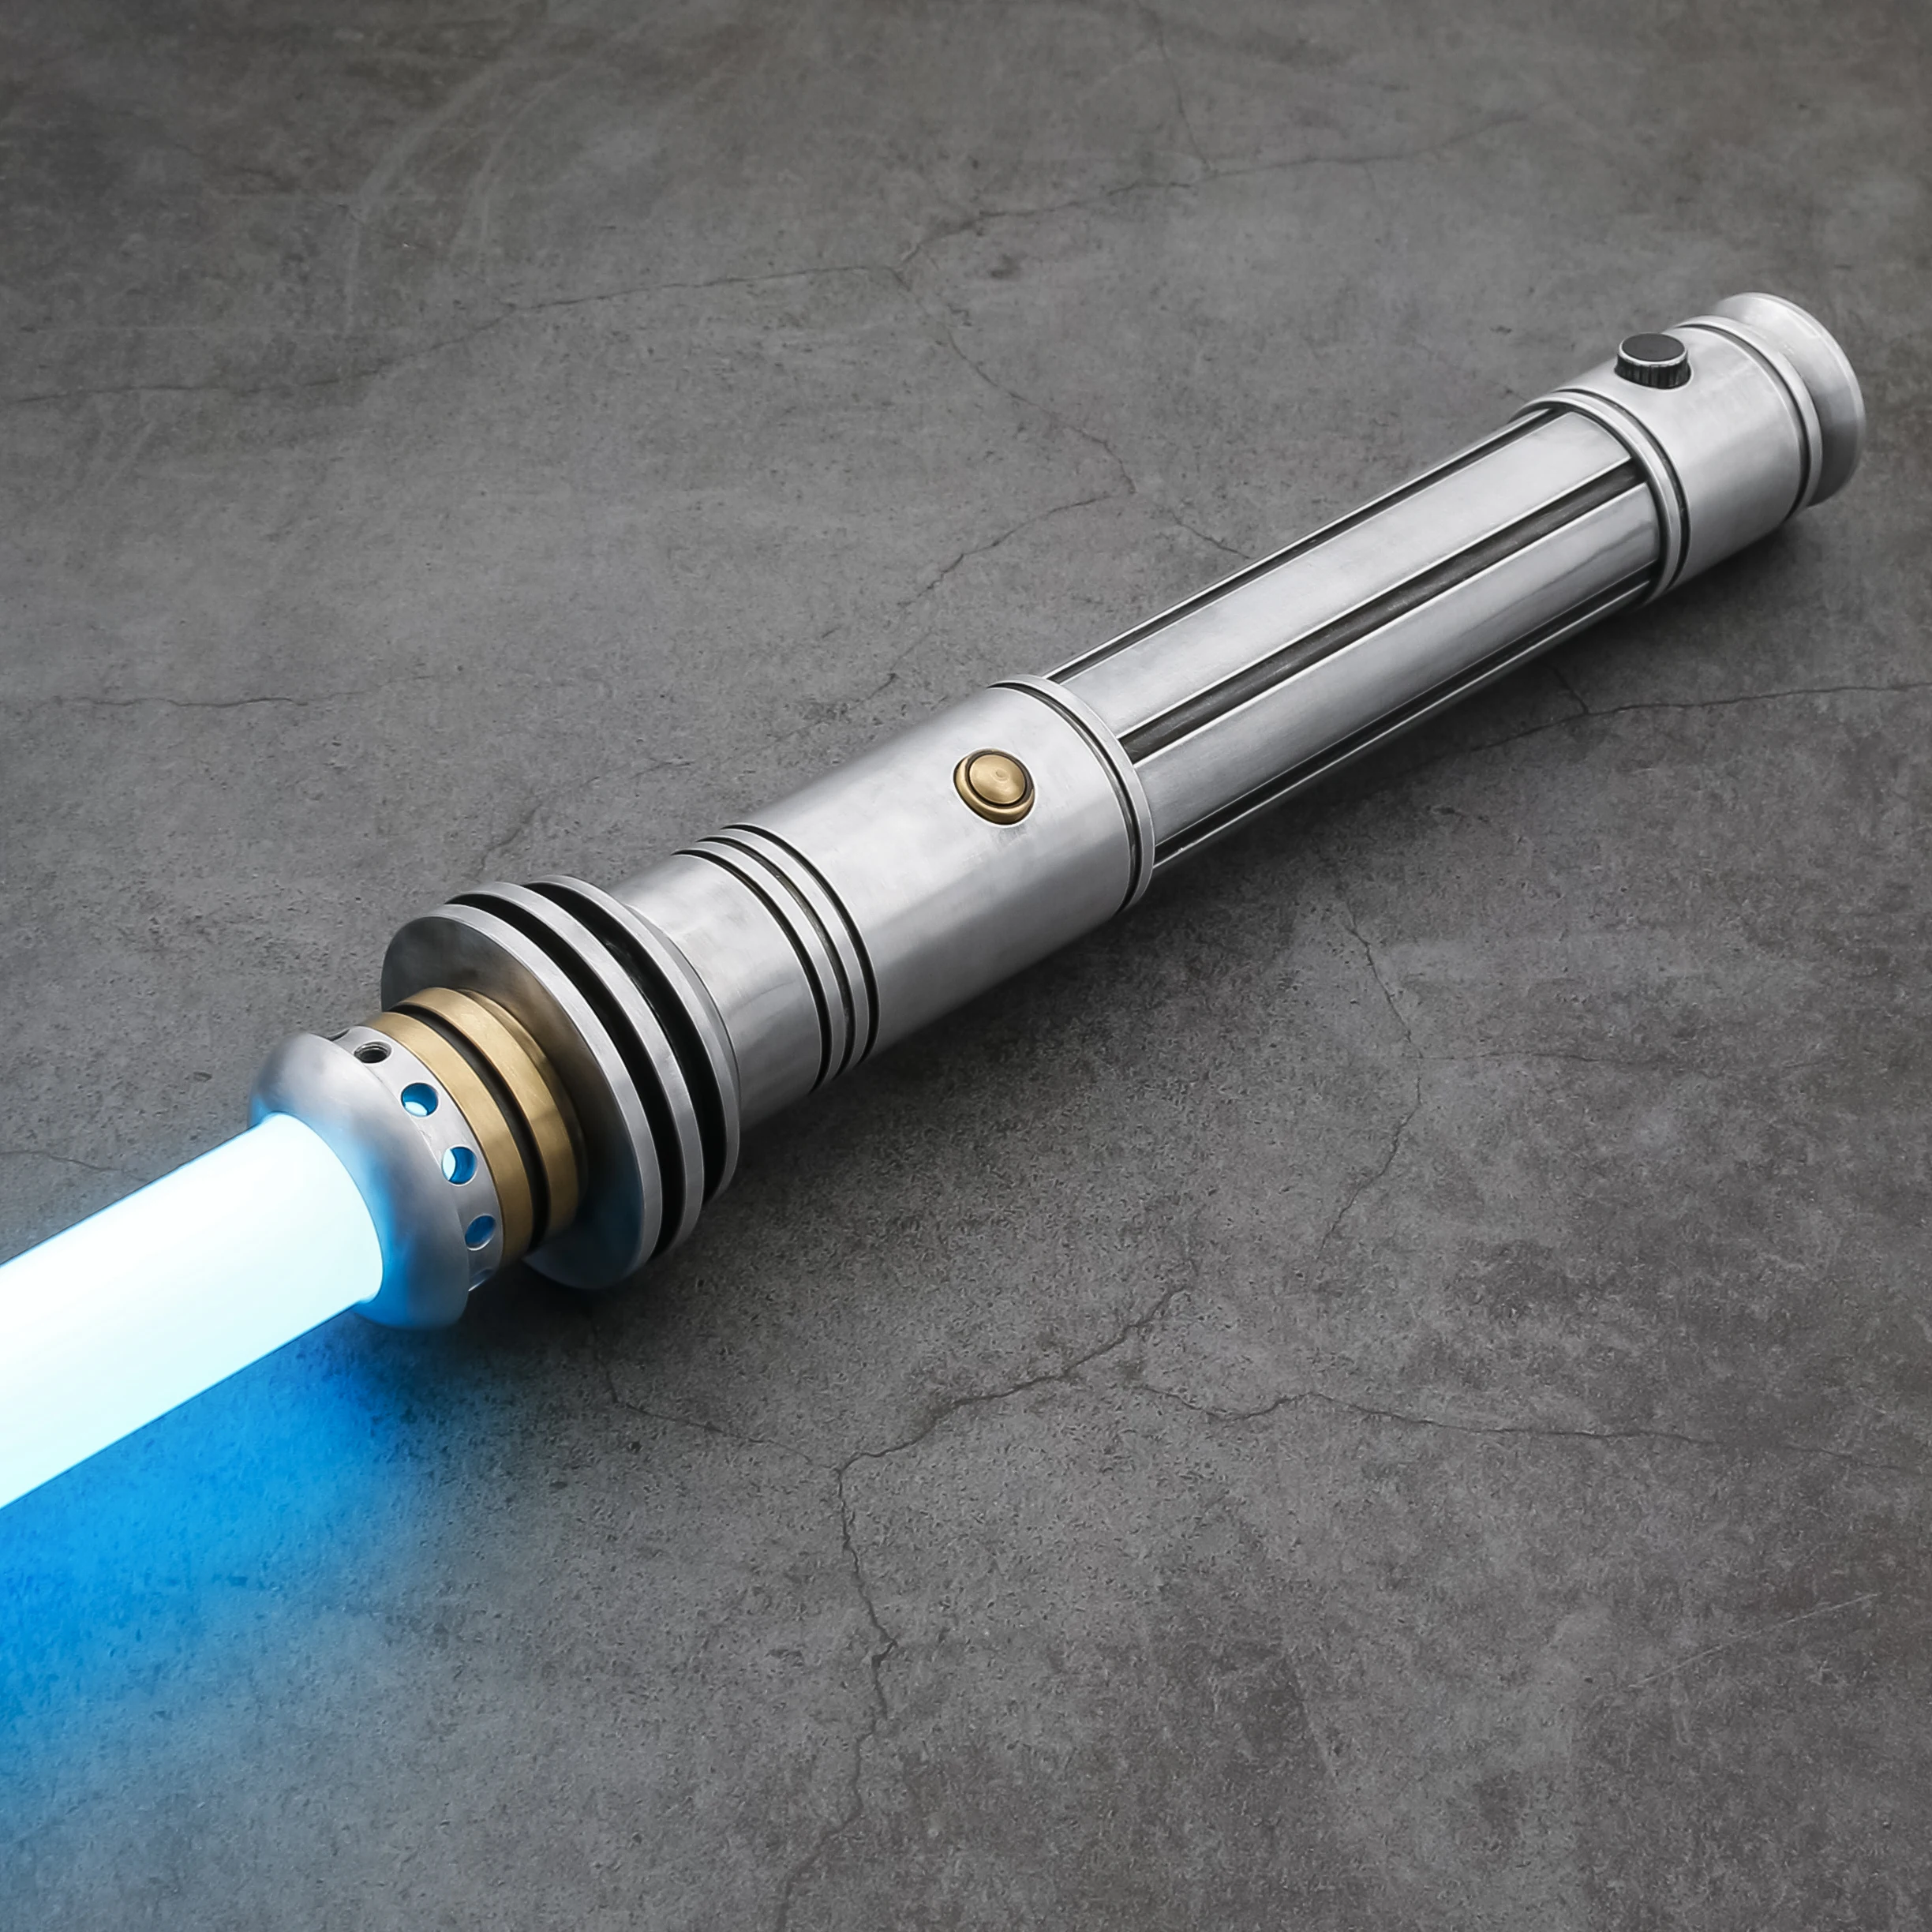 

FOXSABER Dueling Lightsabe, Motion Control Lightsabers for Adults with 12 Color&27 Sound Fonts, Metal Hilt Light Sabers